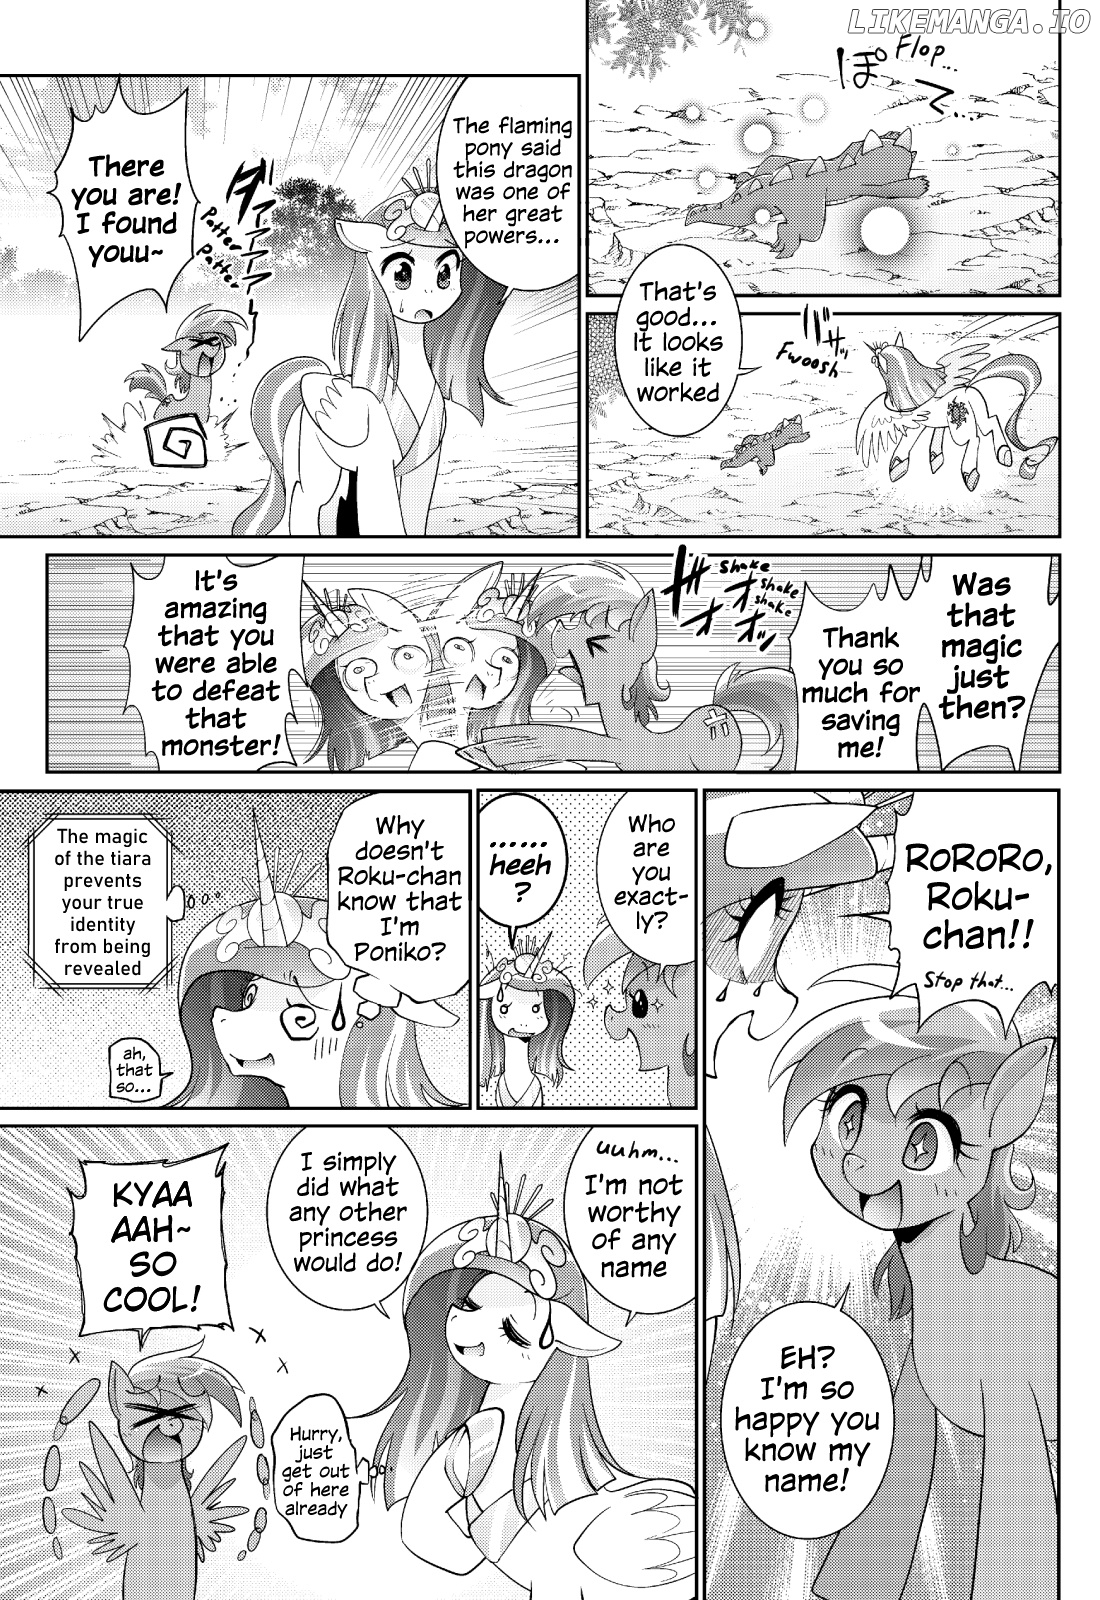 Papipupe Poniko! chapter 1 - page 29